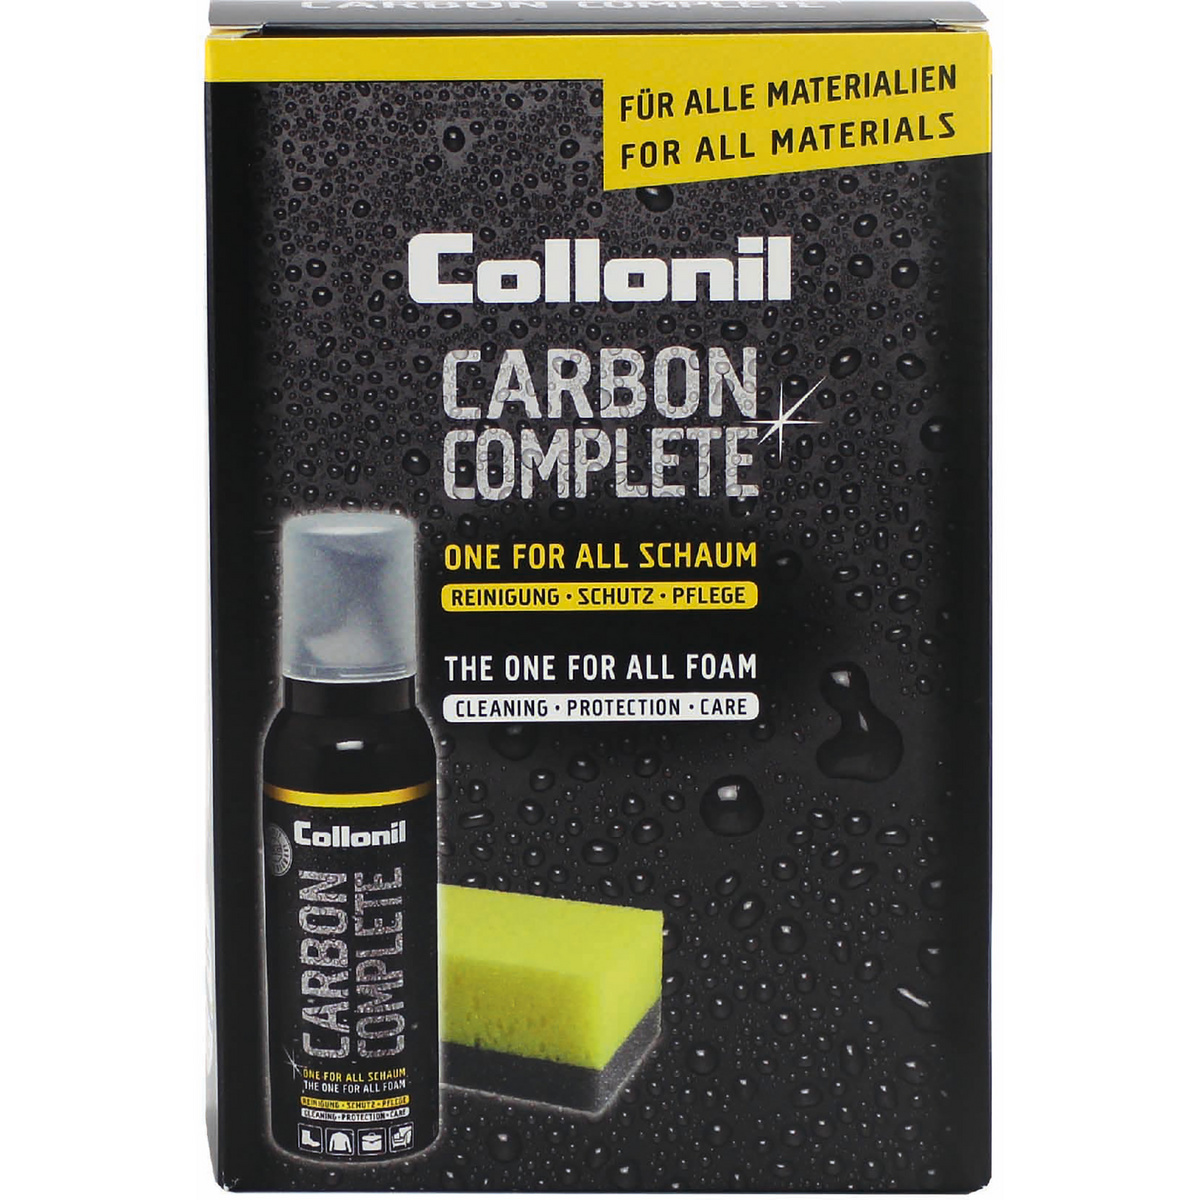 Image of Collonil Carbon Complete